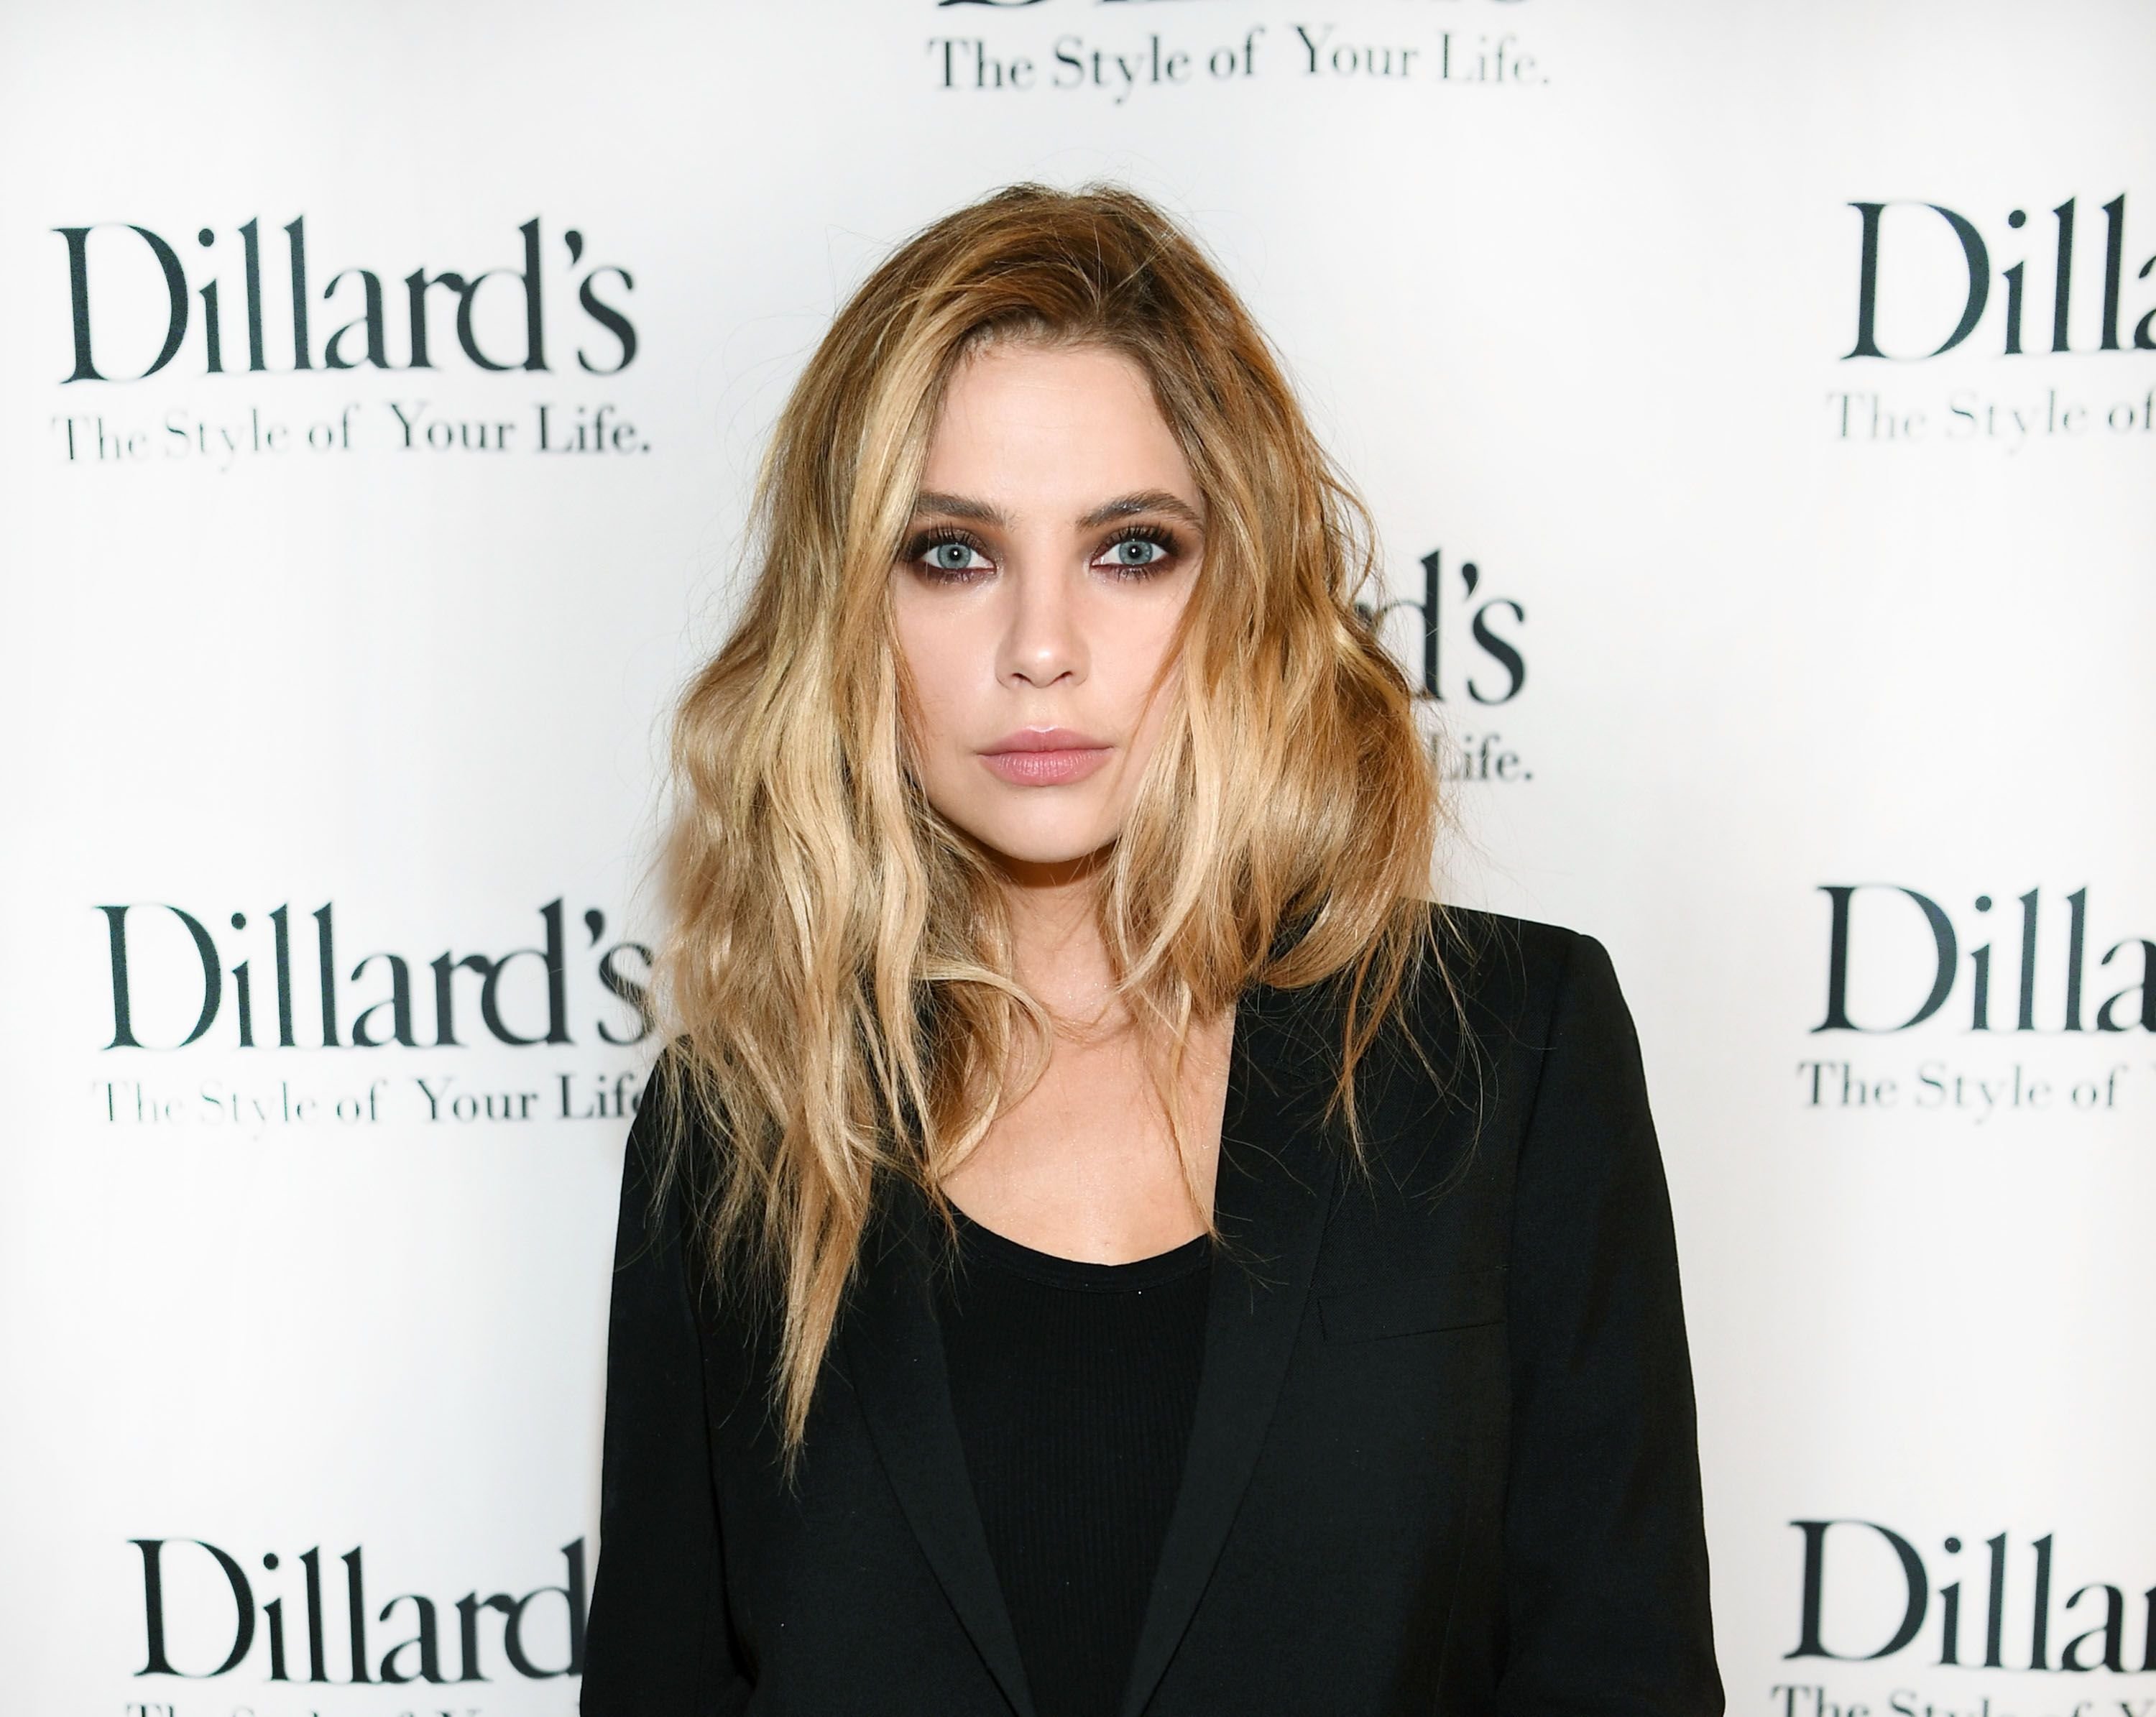 Ashley Benson at the Privé Revaux Eyewear meet & greet event in February 2019 in Las Vegas, Nevada | Source: Getty Images